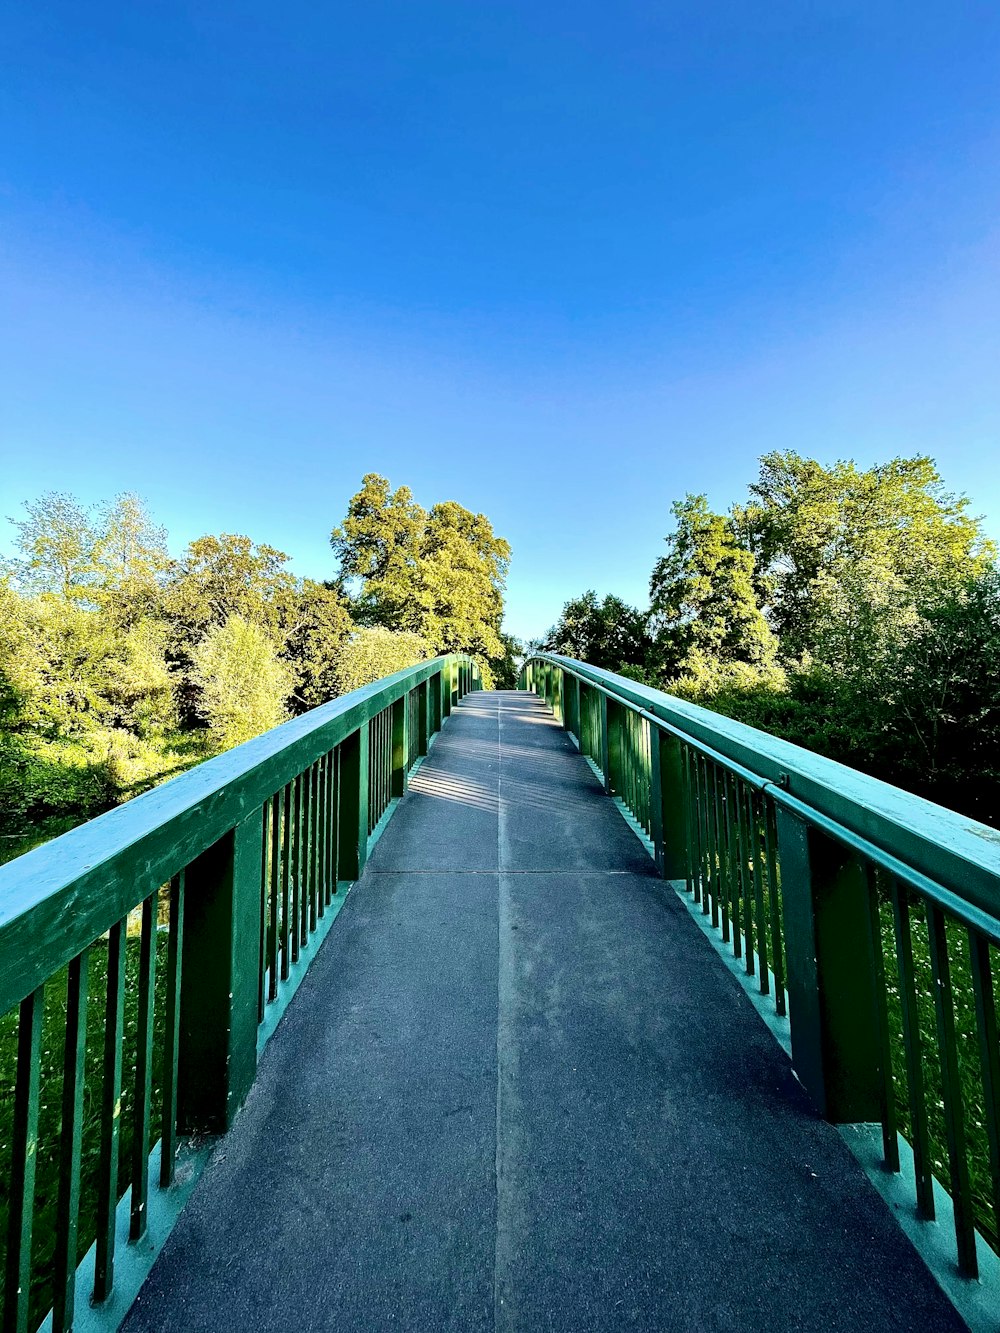 a long bridge with green railings and trees in the background